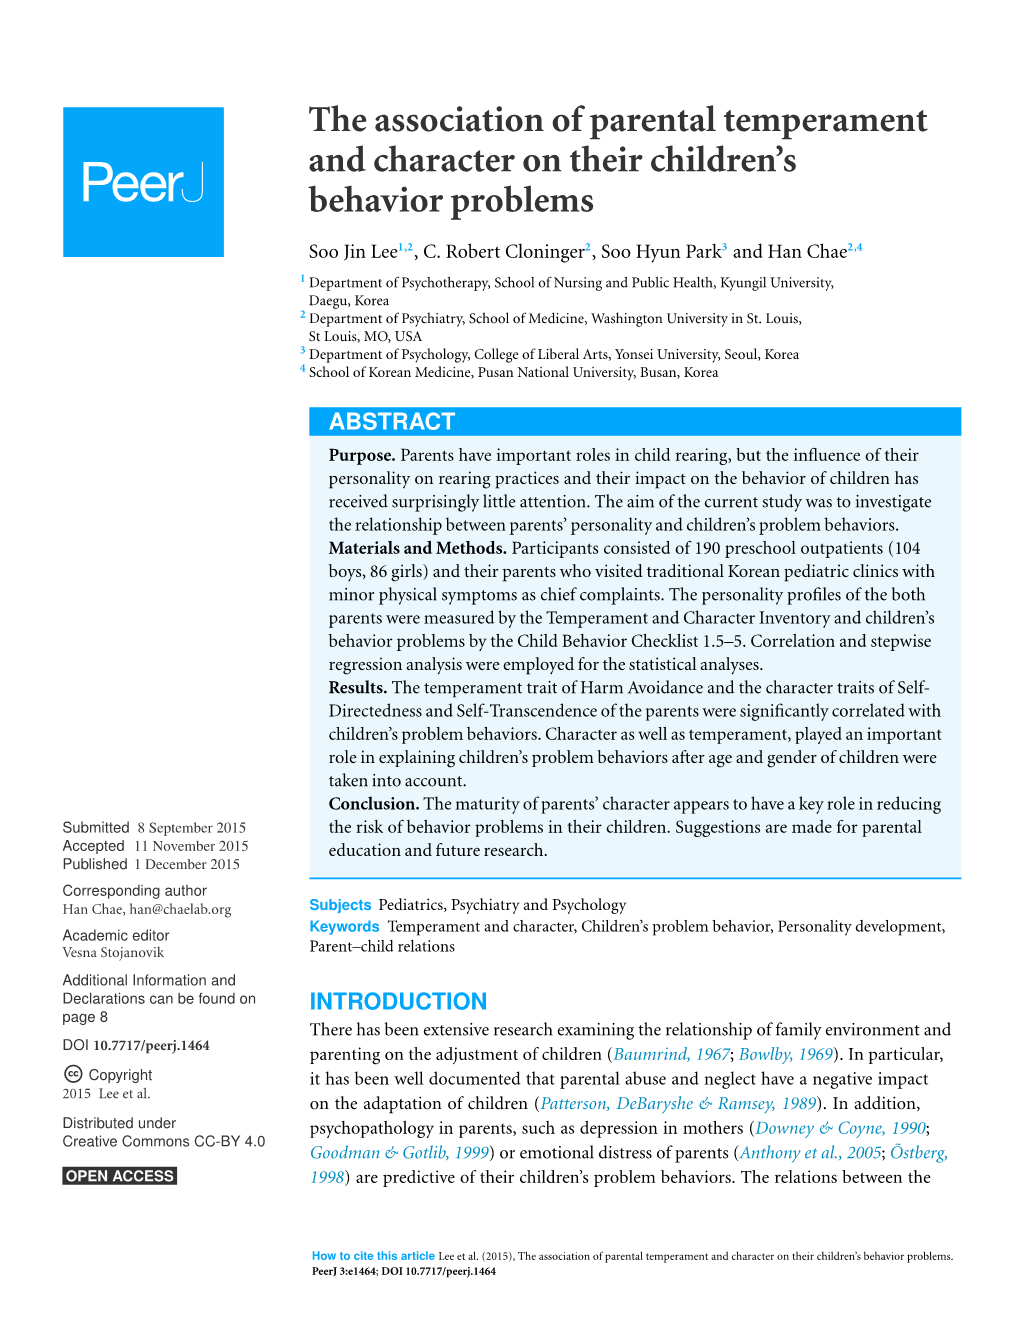 The Association of Parental Temperament and Character on Their Children's Behavior Problems